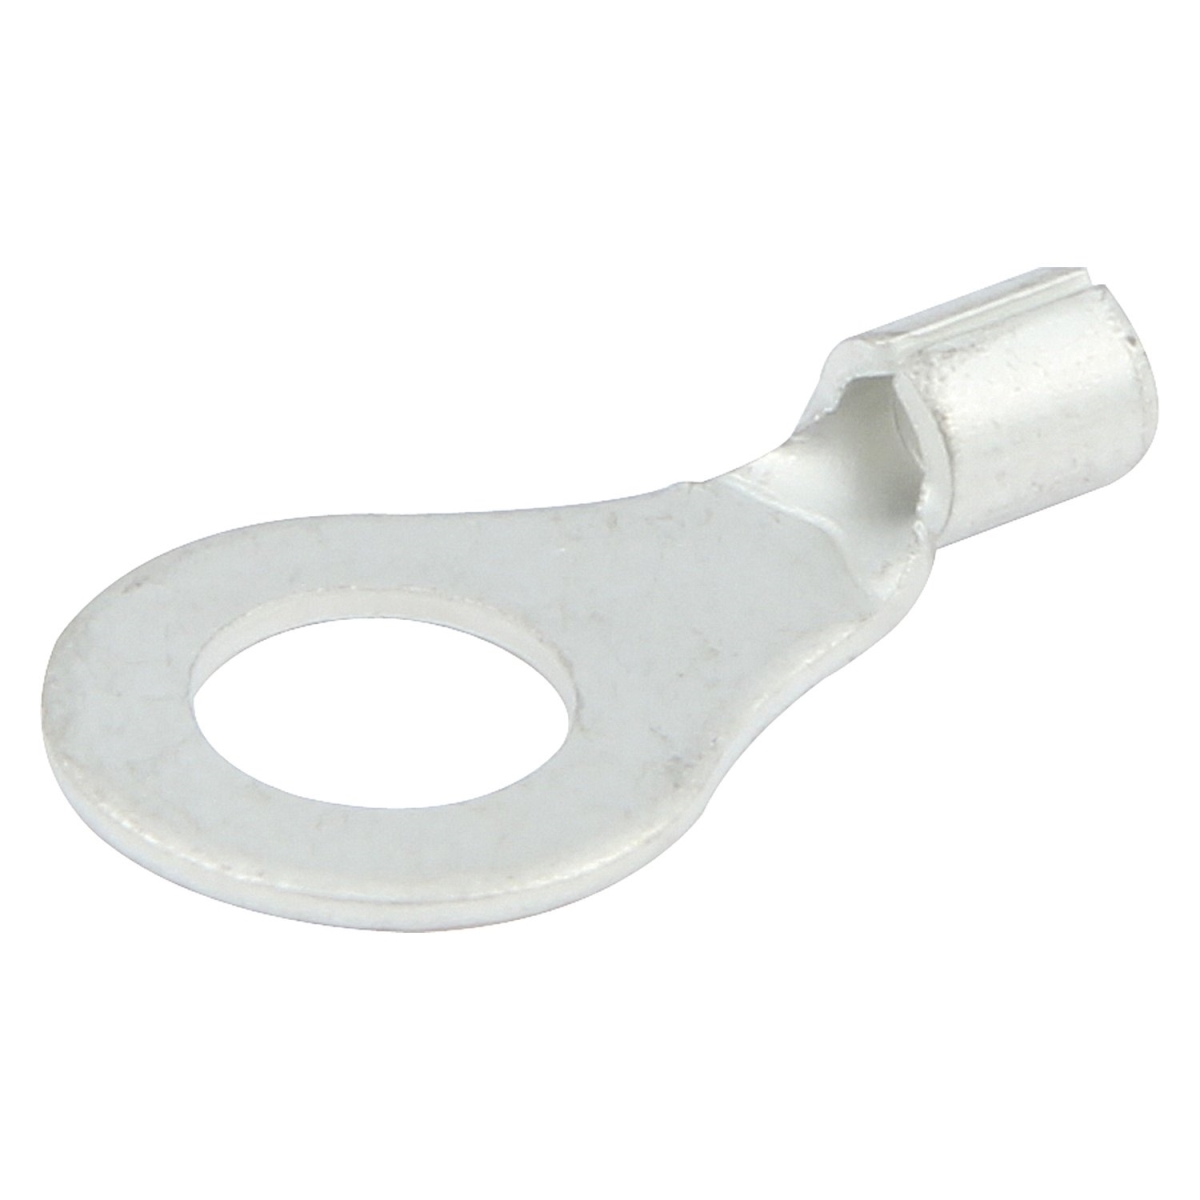 Picture of Allstar Performance ALL76014 0.25 in. Hole 16-14 Gauge Non-Insulated Ring Terminal - Pack of 20